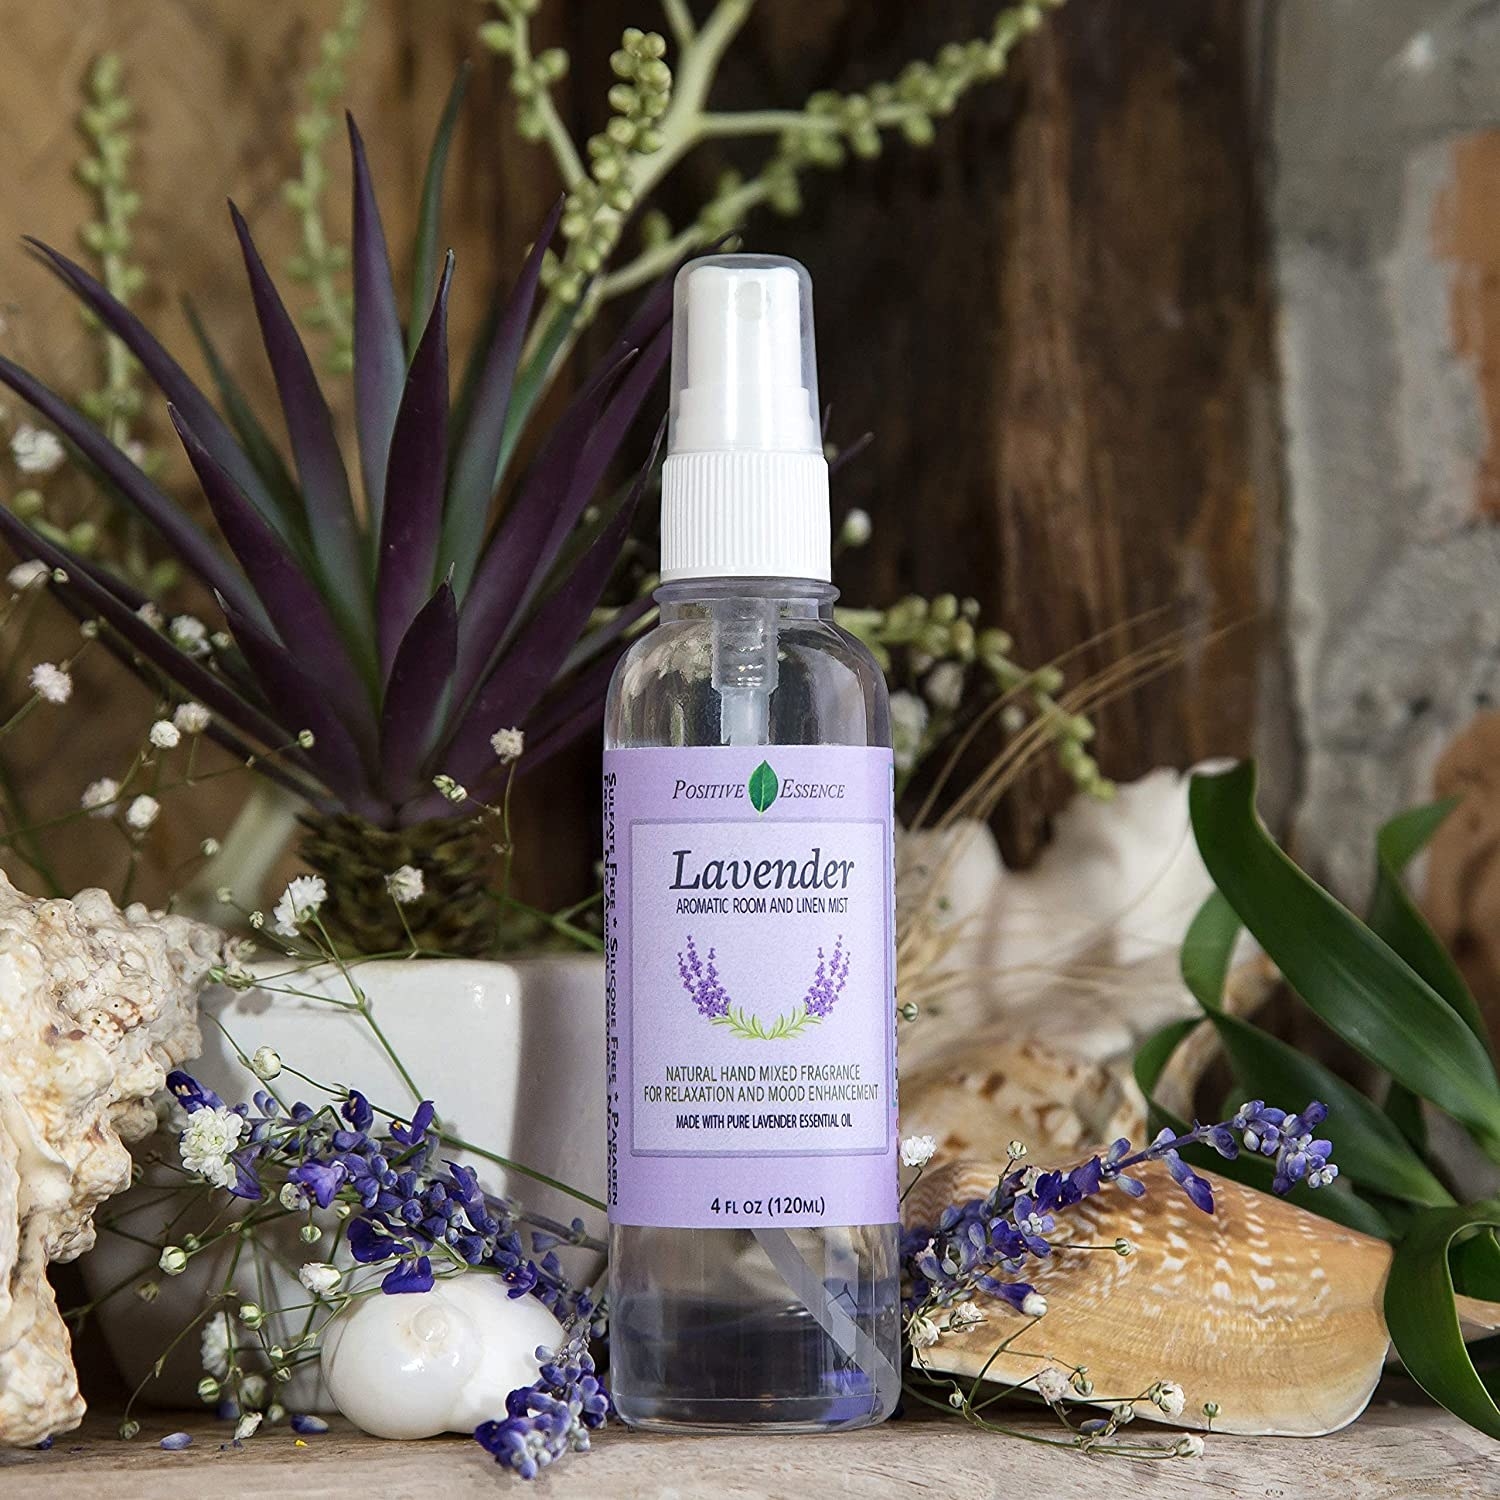 A bottle of lavender spray on a table surrounded by shells, plants, and fresh lavender